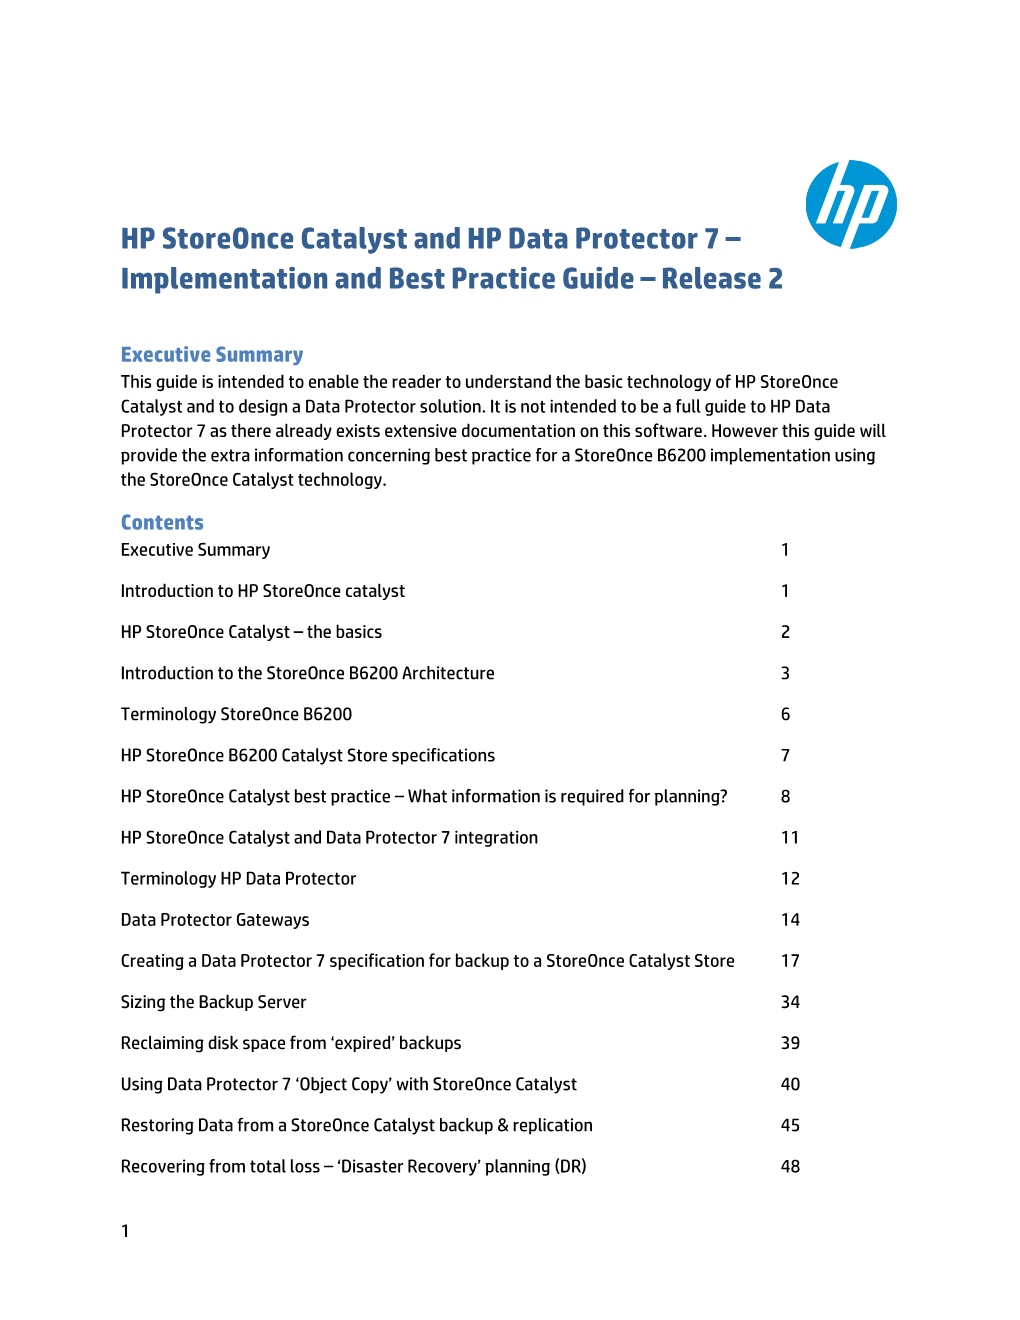 HP Storeonce Catalyst and HP Data Protector 7 – Implementation and Best Practice Guide – Release 2